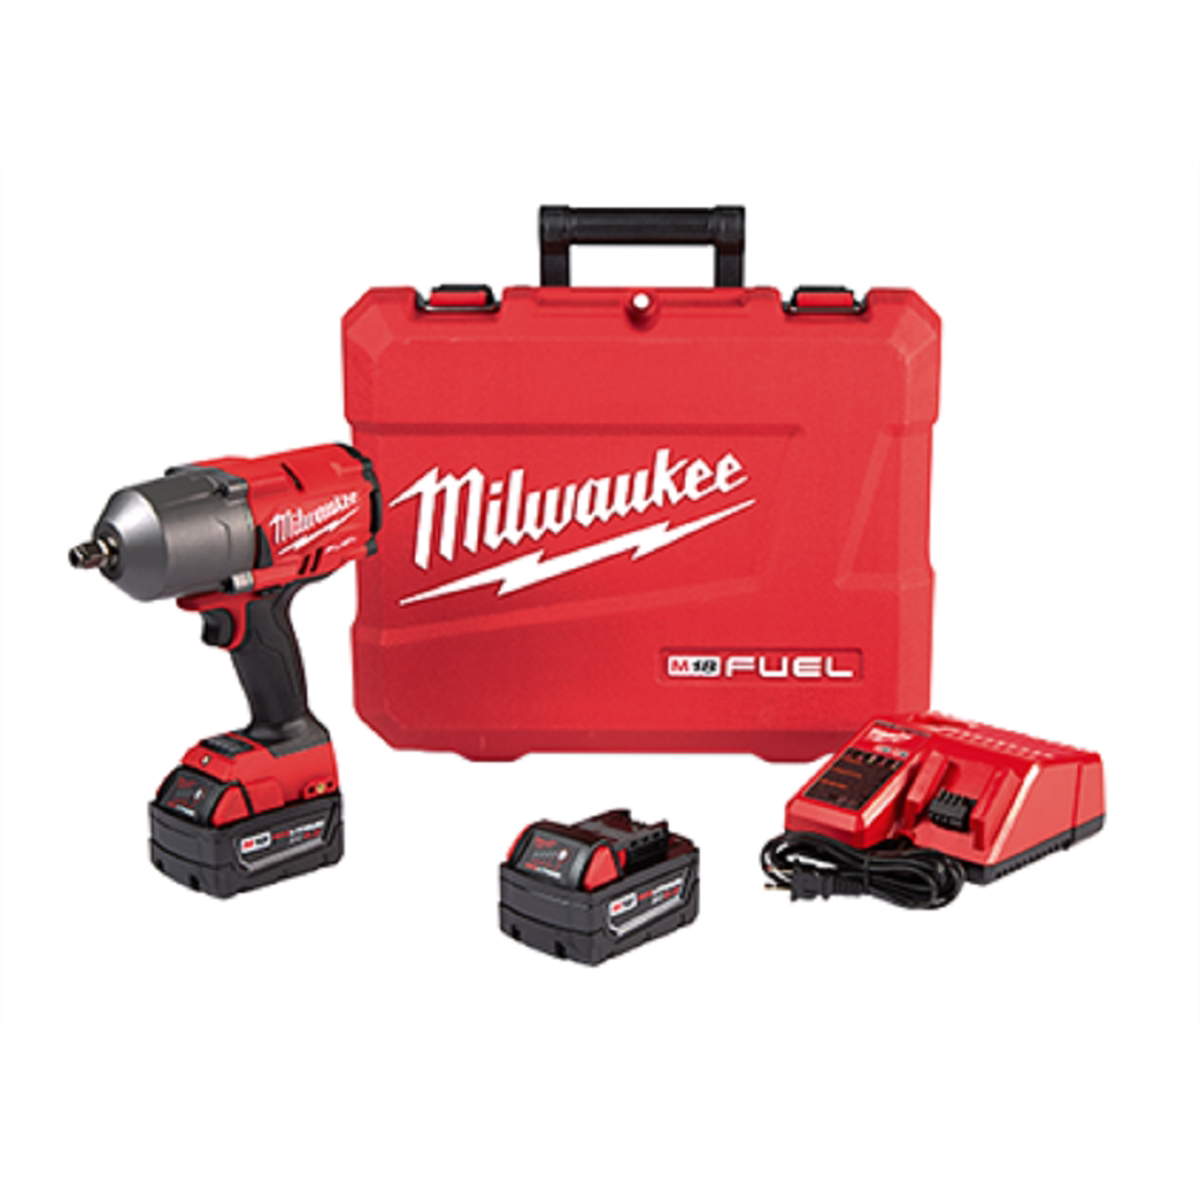 M18 FUEL High Torque 1/2" Impact Wrench w Fric Rin...